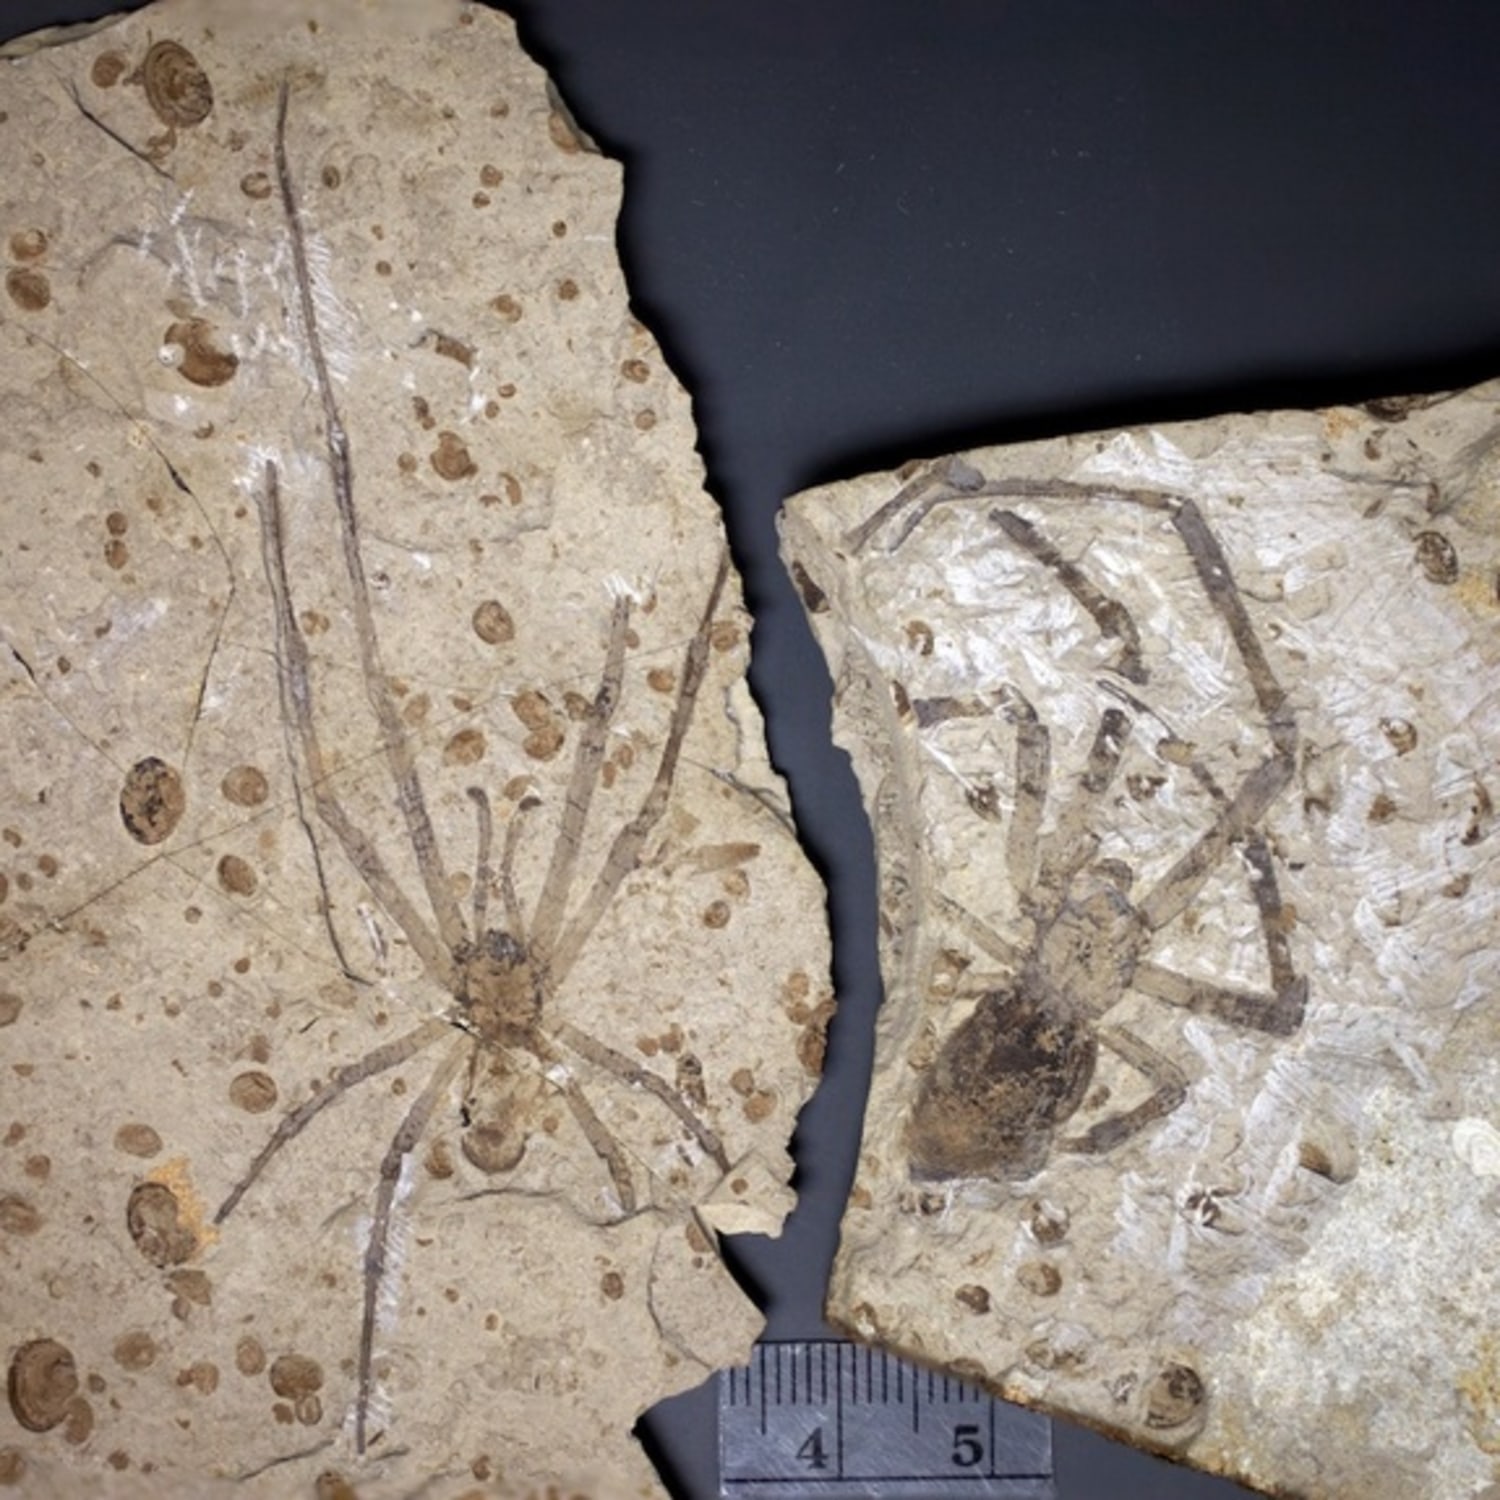 Big spider fossil now has a mate -- but it's complicated